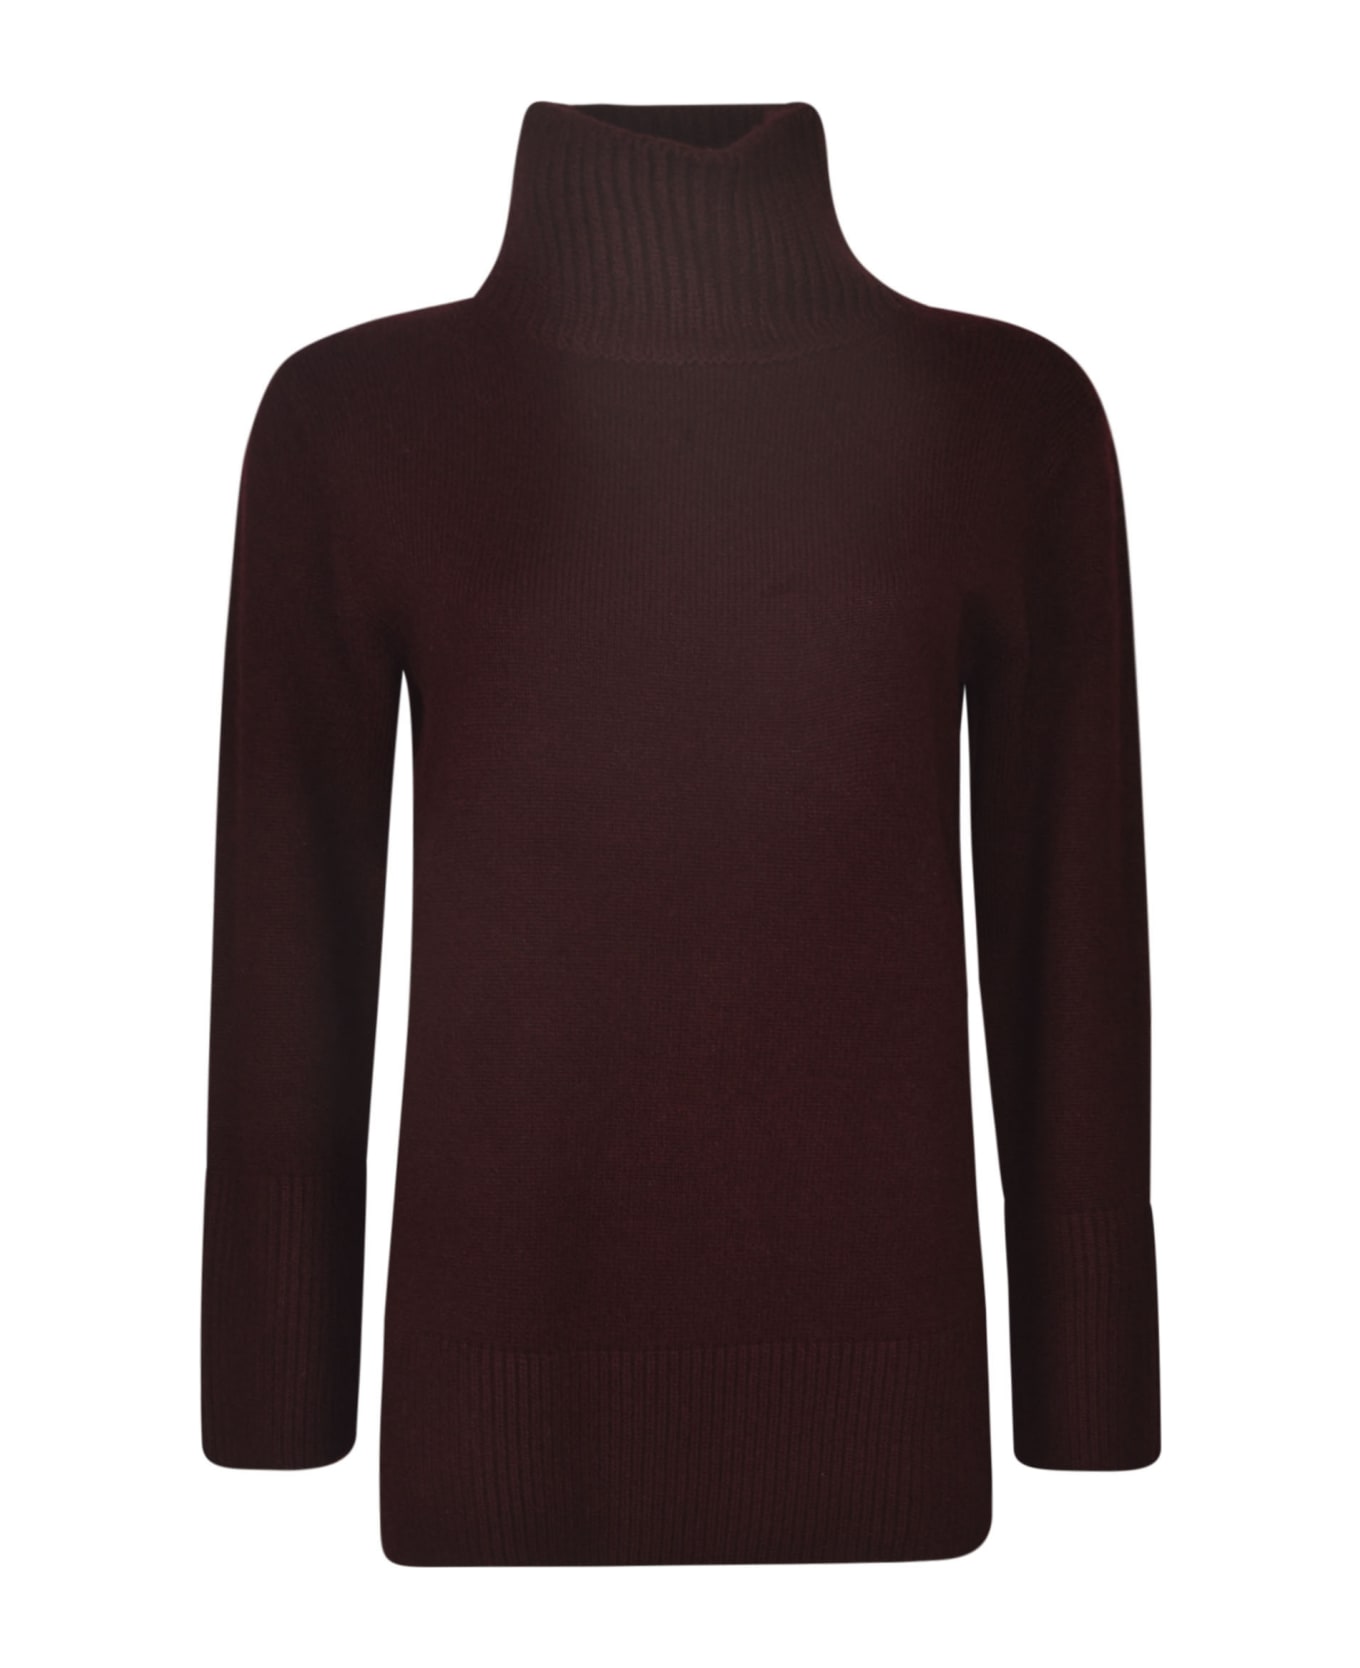 Vince Turtleneck Plain Ribbed Sweater - and the other filled with goodie bags featuring T-shirts